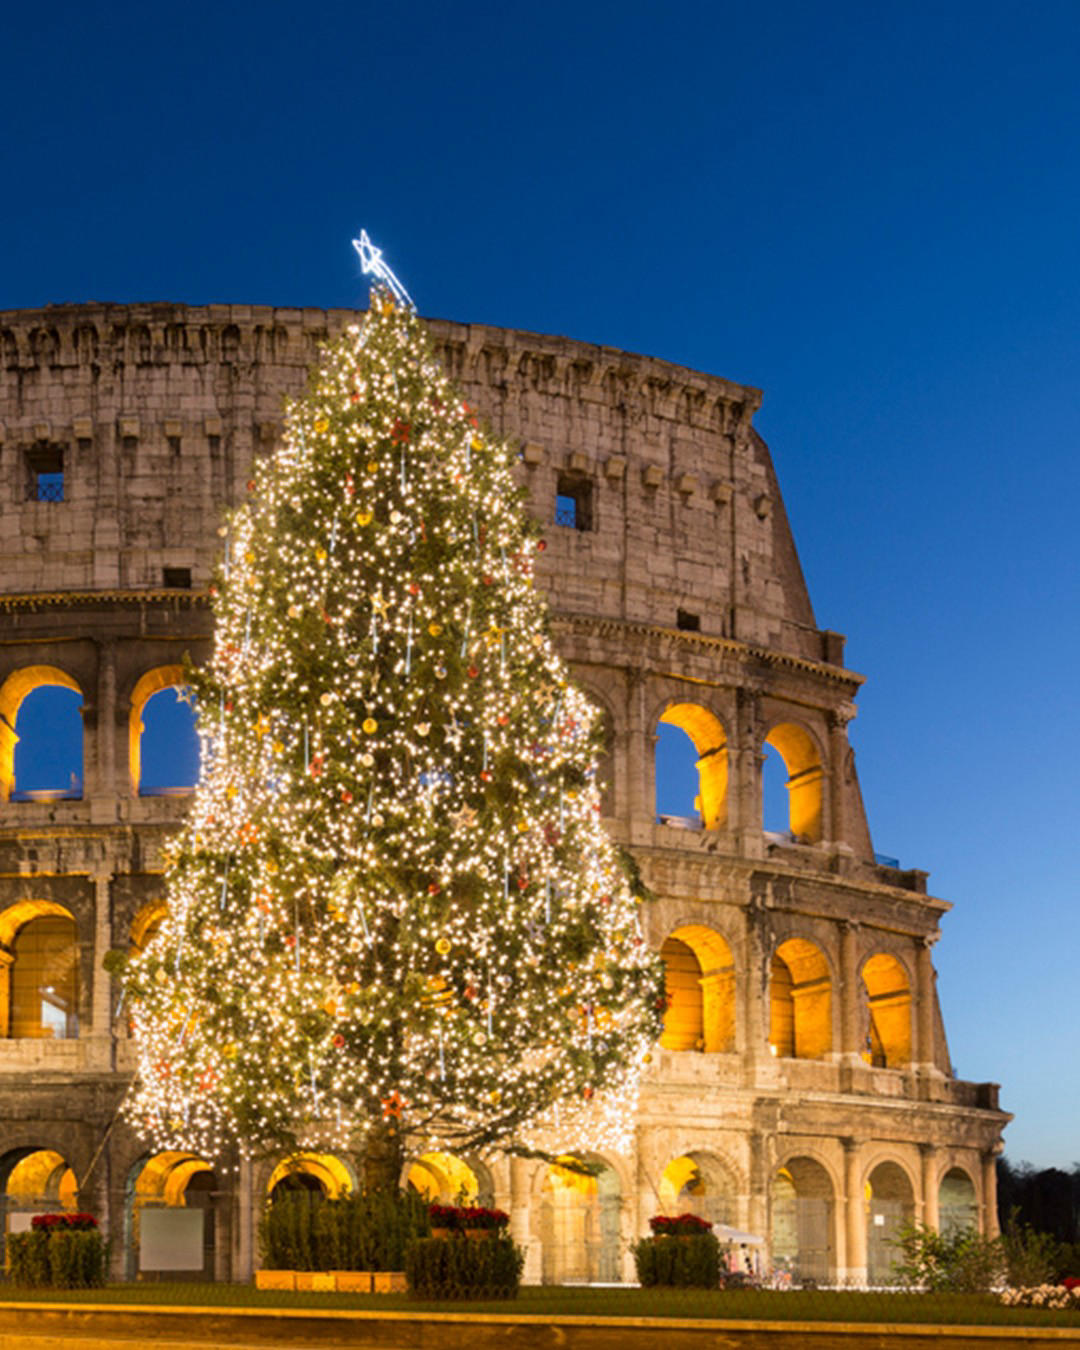 Baglioni Hotel Regina - Enjoy the magic of #Christmas in the beating historic heart of the Eternal C